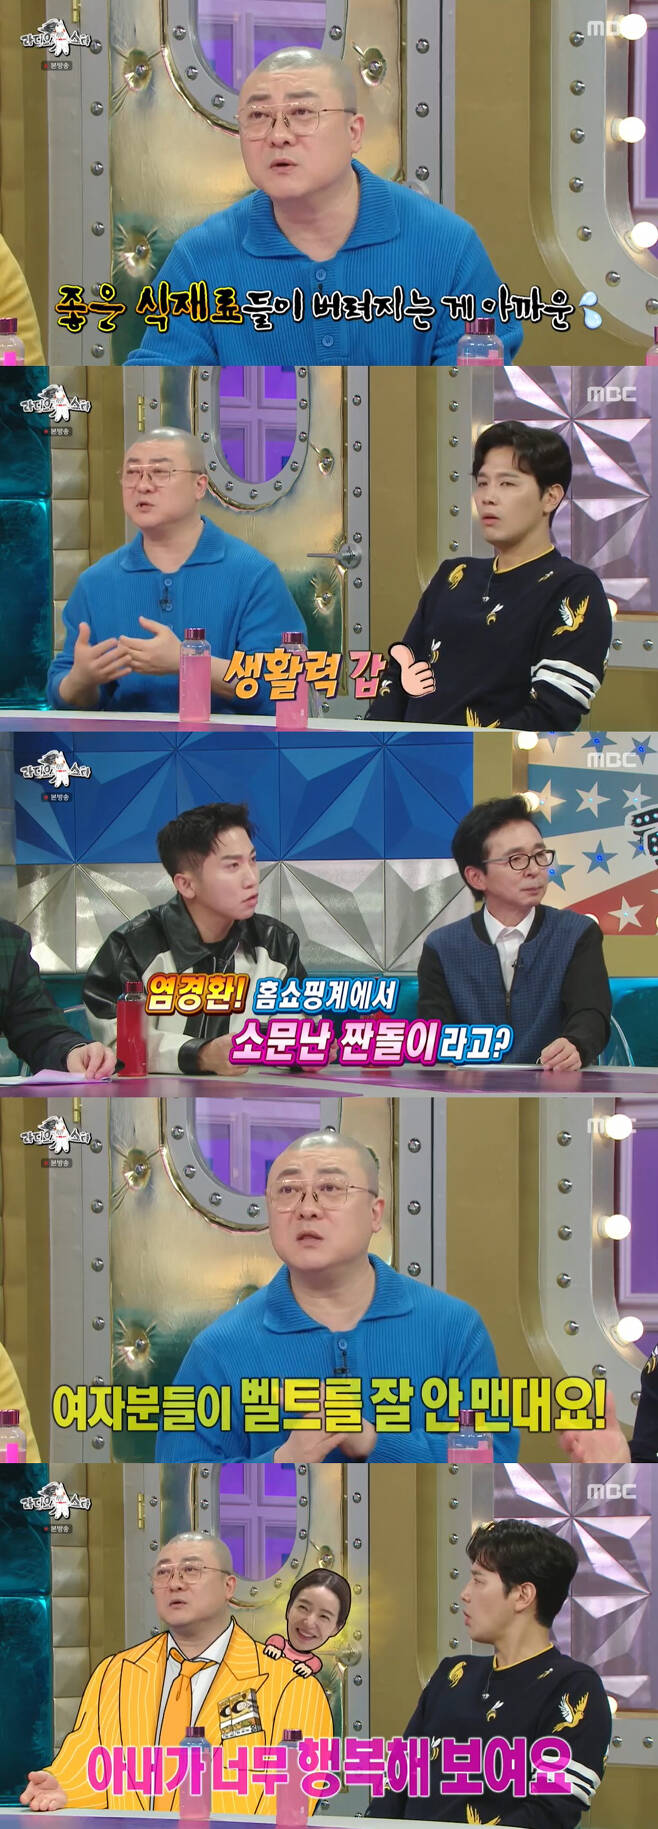 Kyunghwan Yeom, a comedian who enjoys the heyday of sales in the home shopping system, showed a lot of vitality.MBC entertainment program Radio Star broadcasted on the 10th was decorated with two special features of My Art Uncle starring Kim Eung-su, for Kwon Il-yong, Kyunghwan Yeom and Son Jun-ho.Home shopping system Yoo Jae-seok Kyunghwan Yeom said, I prepare my own clothes. I have to wear more than 2XL size because I have a lot of weight.I buy clothes according to size and product image. The secret of home shopping is also in costumes. Actually, Kyunghwan Yeoms costume brought to the studio reminded me of related products.Kimchi introduced a red shirt for broadcasting, a chestnut-style shirt for princess night broadcasting, and a T-shirt similar to the bottom of a frying pan for frying.The main audience is people in their 50s and 70s. I like to make them understand the product in a friendly way and talk to them as if they were my friends. I dont want to make them laugh too much, he said.Kyunghwan Yeom said, I eat a lot of food, but those who cook give me the leftovers.Broadcasting When Im done, I have to throw away good food, so I broadcast and ask me to eat the food I ate at home. I do not think its salty. John Young said, You can do that.In the next life, he wanted to be born as Wife. Kyunghwan Yeom said, Wife looks so happy.If there is ubiquity in the company, wealth comes in by the surroundings even if you do not try hard, but Wife has four ubiquities.There was also a story about the comedian. Kyunghwan Yeom said, In the old days, there was a time when there was a nahuna.At that time, the original Korean wave star was Clon, so he formed a parody of Clon and Clon. 